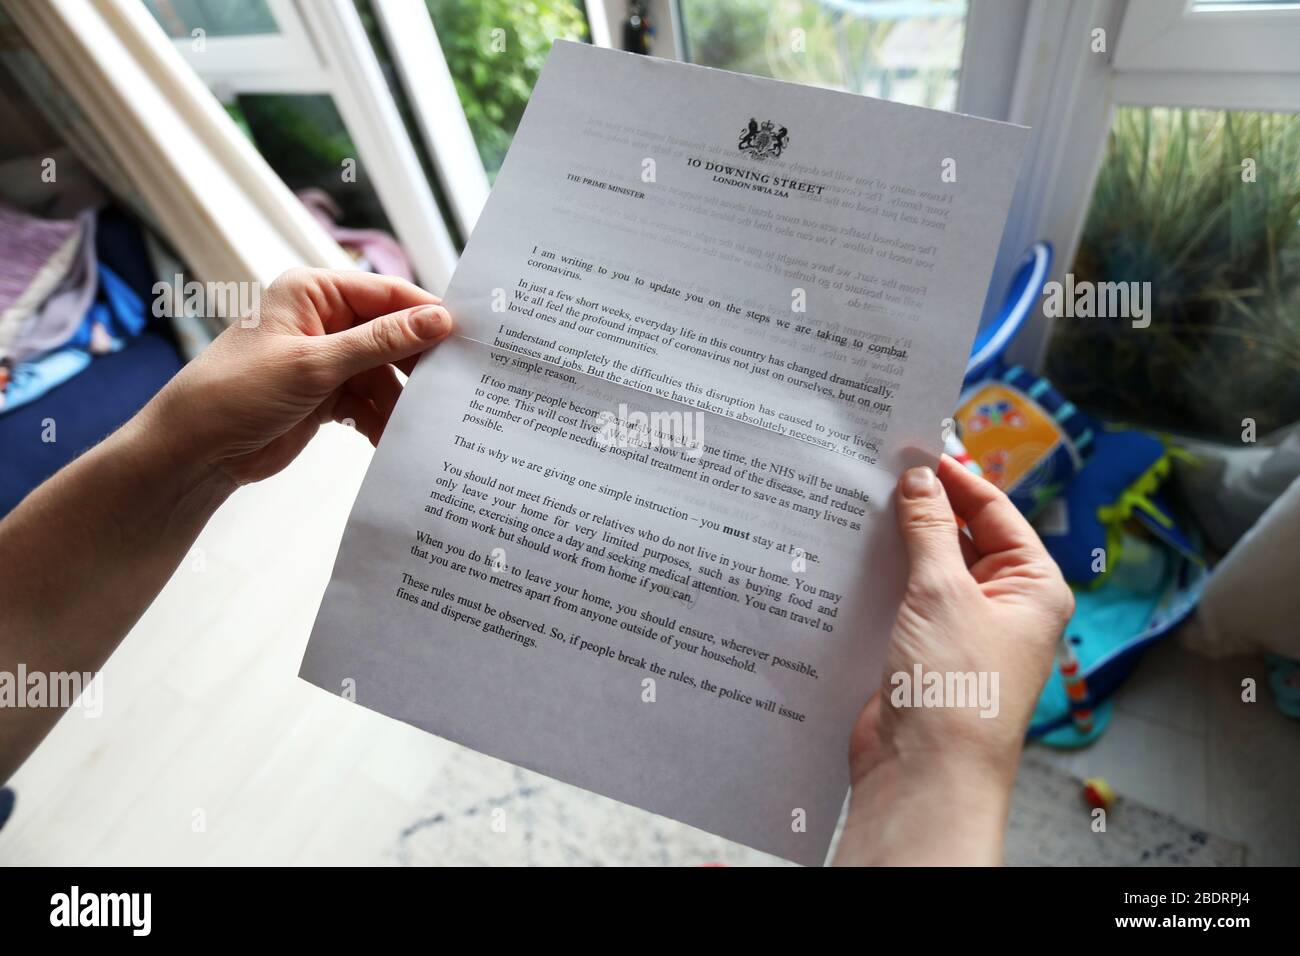 Chichester, West Sussex, UK - Letter arrived from the Boris Johnson and the British Government explaining the Coronavirus, (Covid-19) situation in the UK and the current response to it. Thursday 9th April 2020 © Sam Stephenson / Alamy Live News. Stock Photo